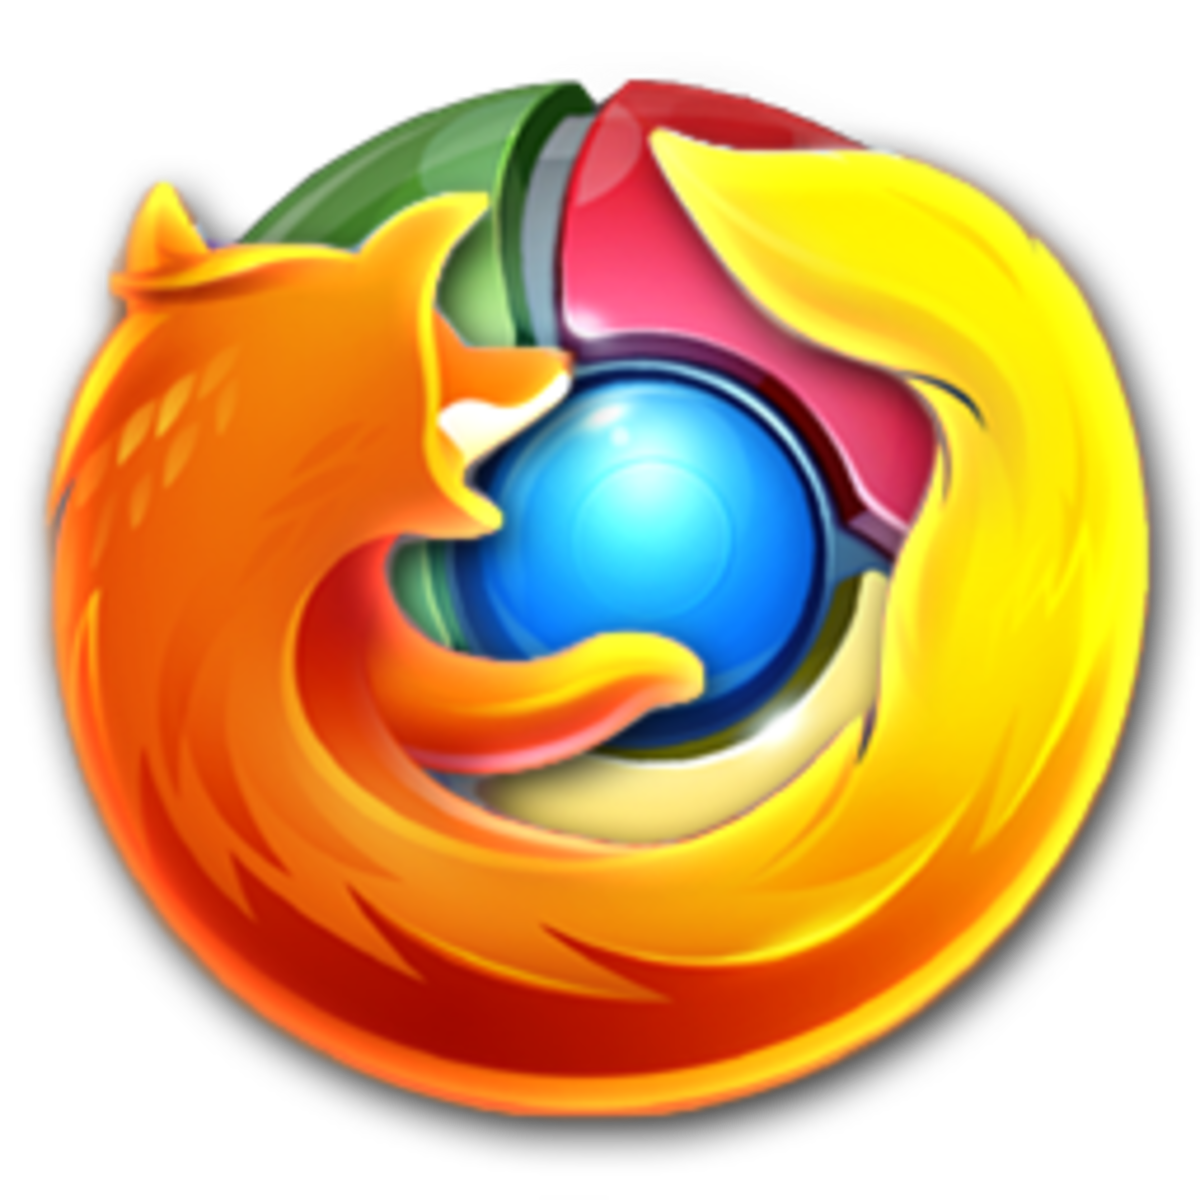 Chrome Vs Firefox, Which is Better? CPU Usage and More!